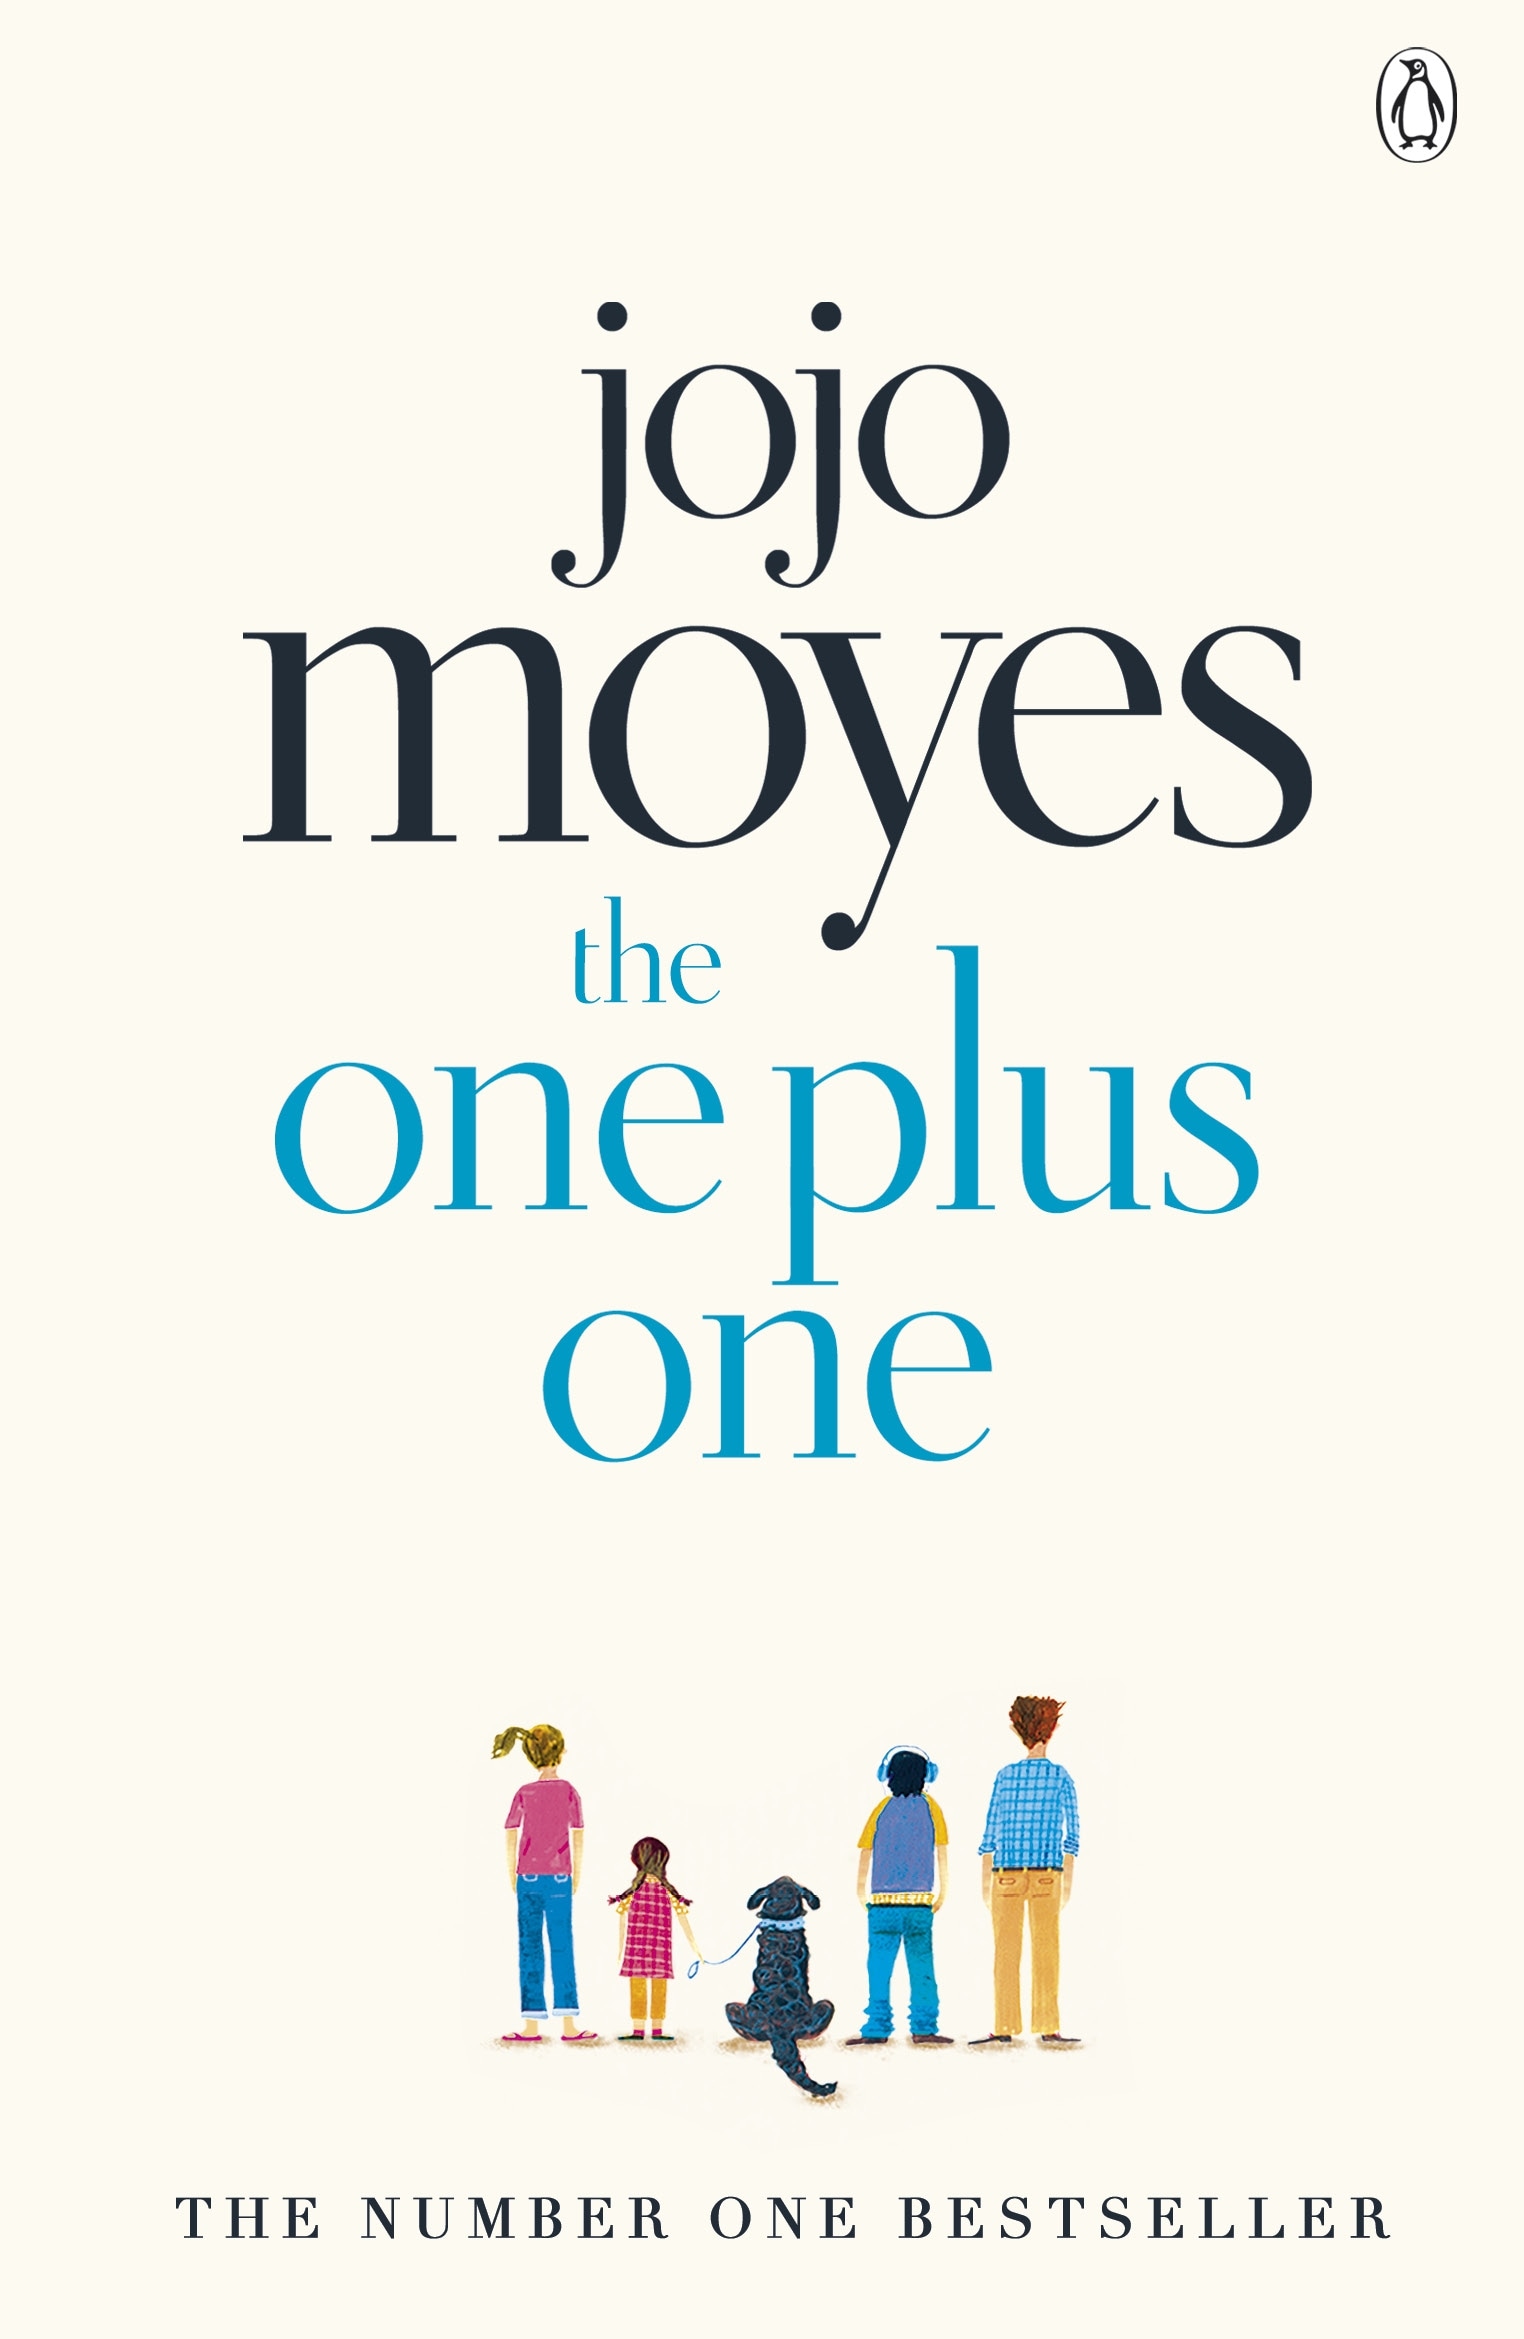 Book “The One Plus One” by Jojo Moyes — July 31, 2014